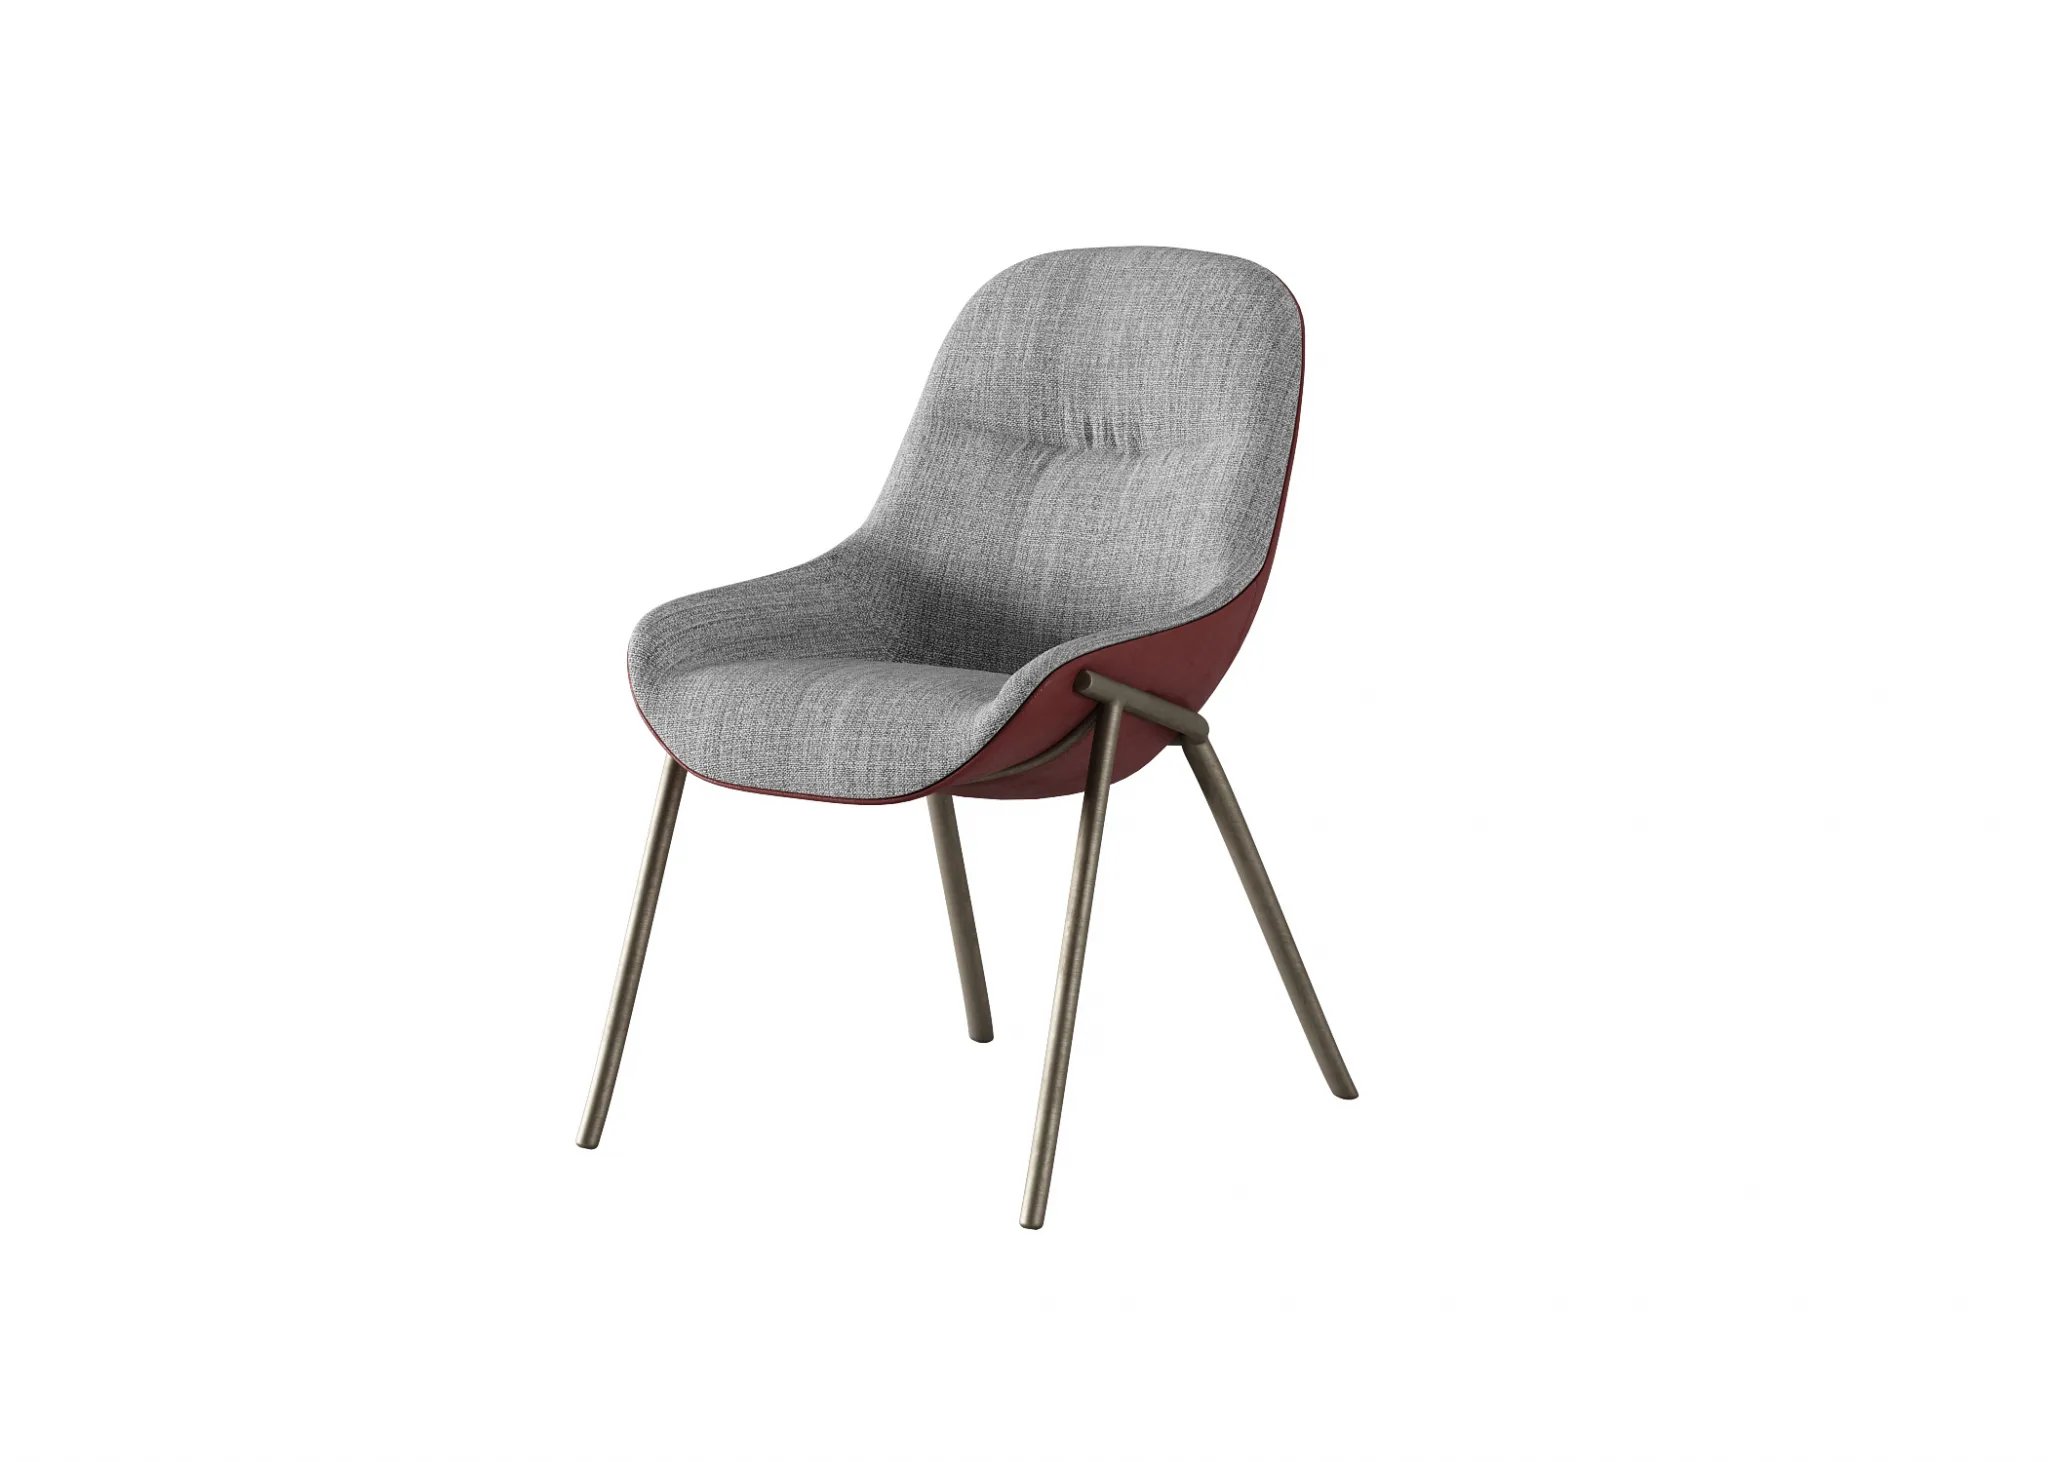 FURNITURE 3D MODELS – CHAIRS – 0322